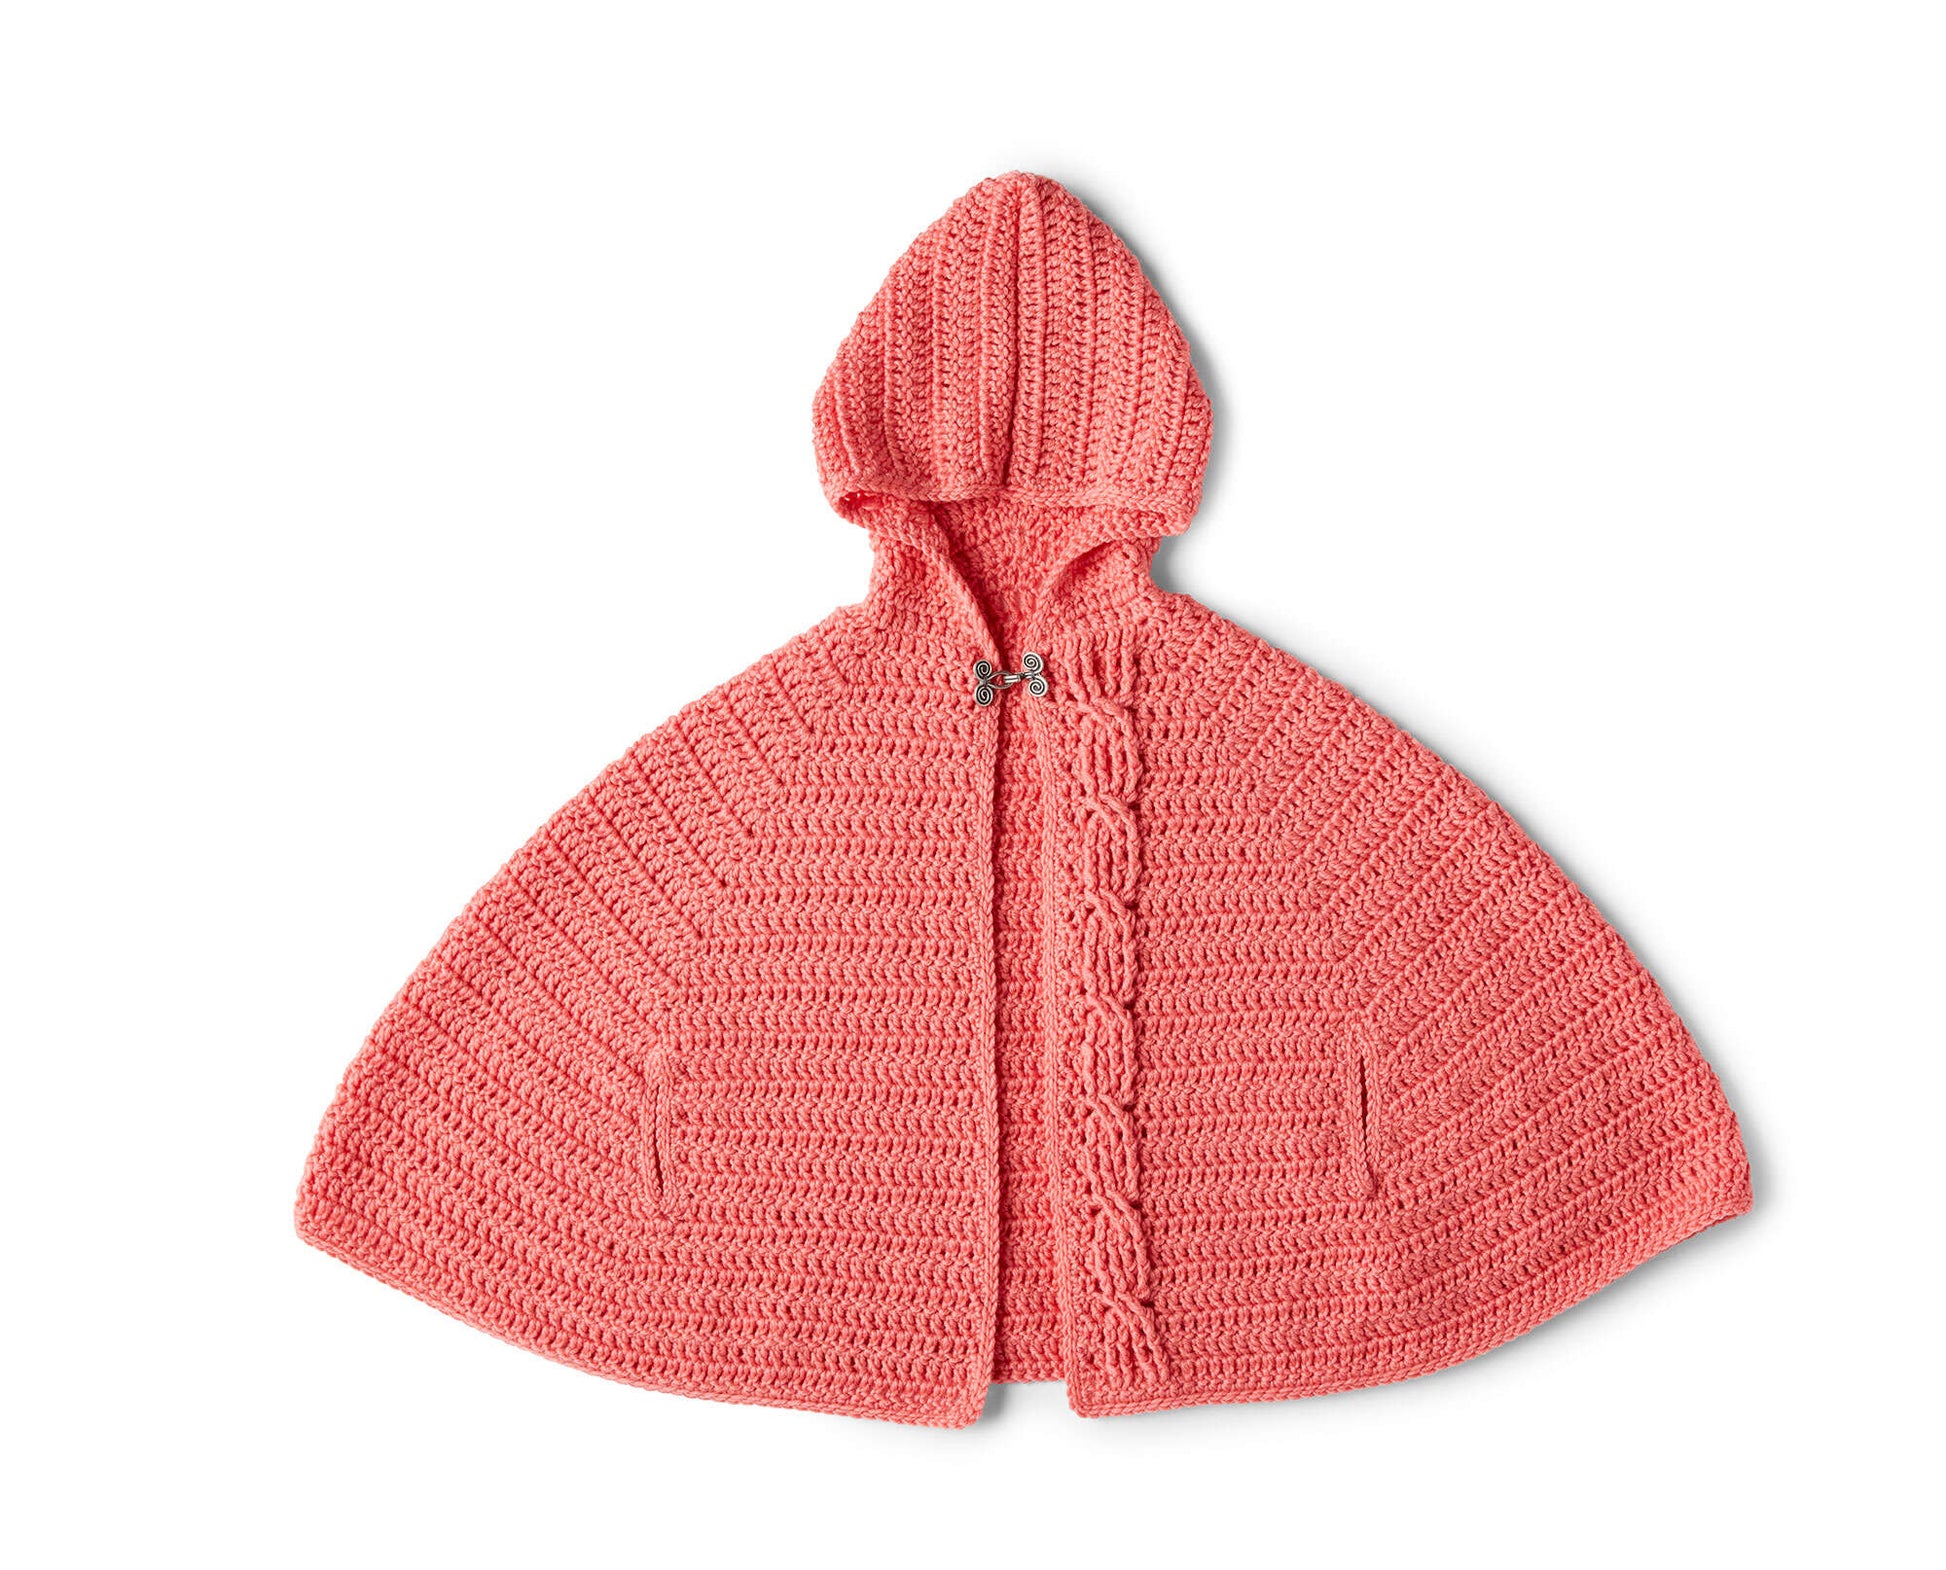 Free Red Heart Girl's Chic Hooded Capelet Crochet Pattern